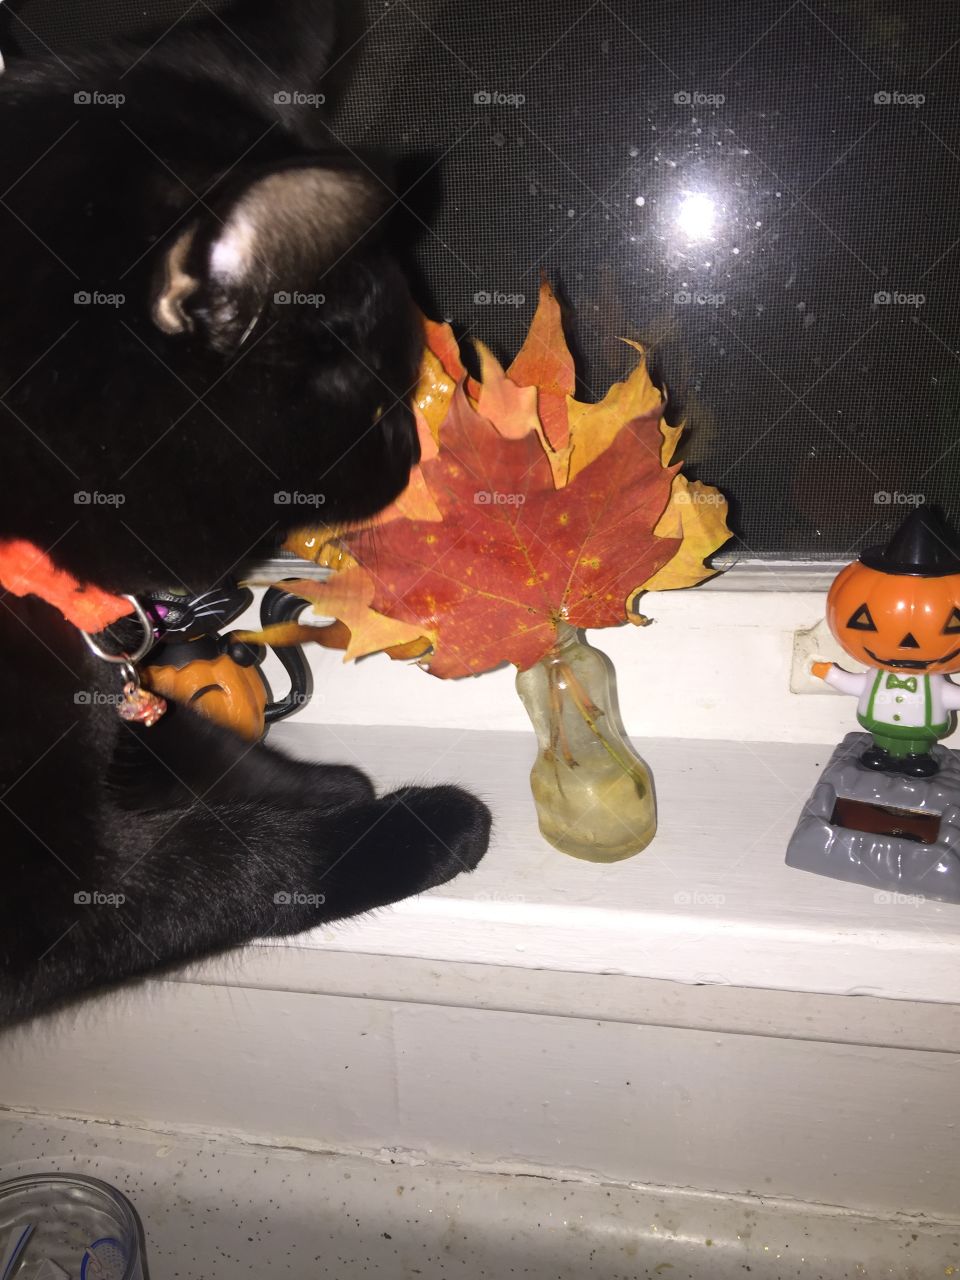 Meep the cat trying to eat the fall leaves so cute